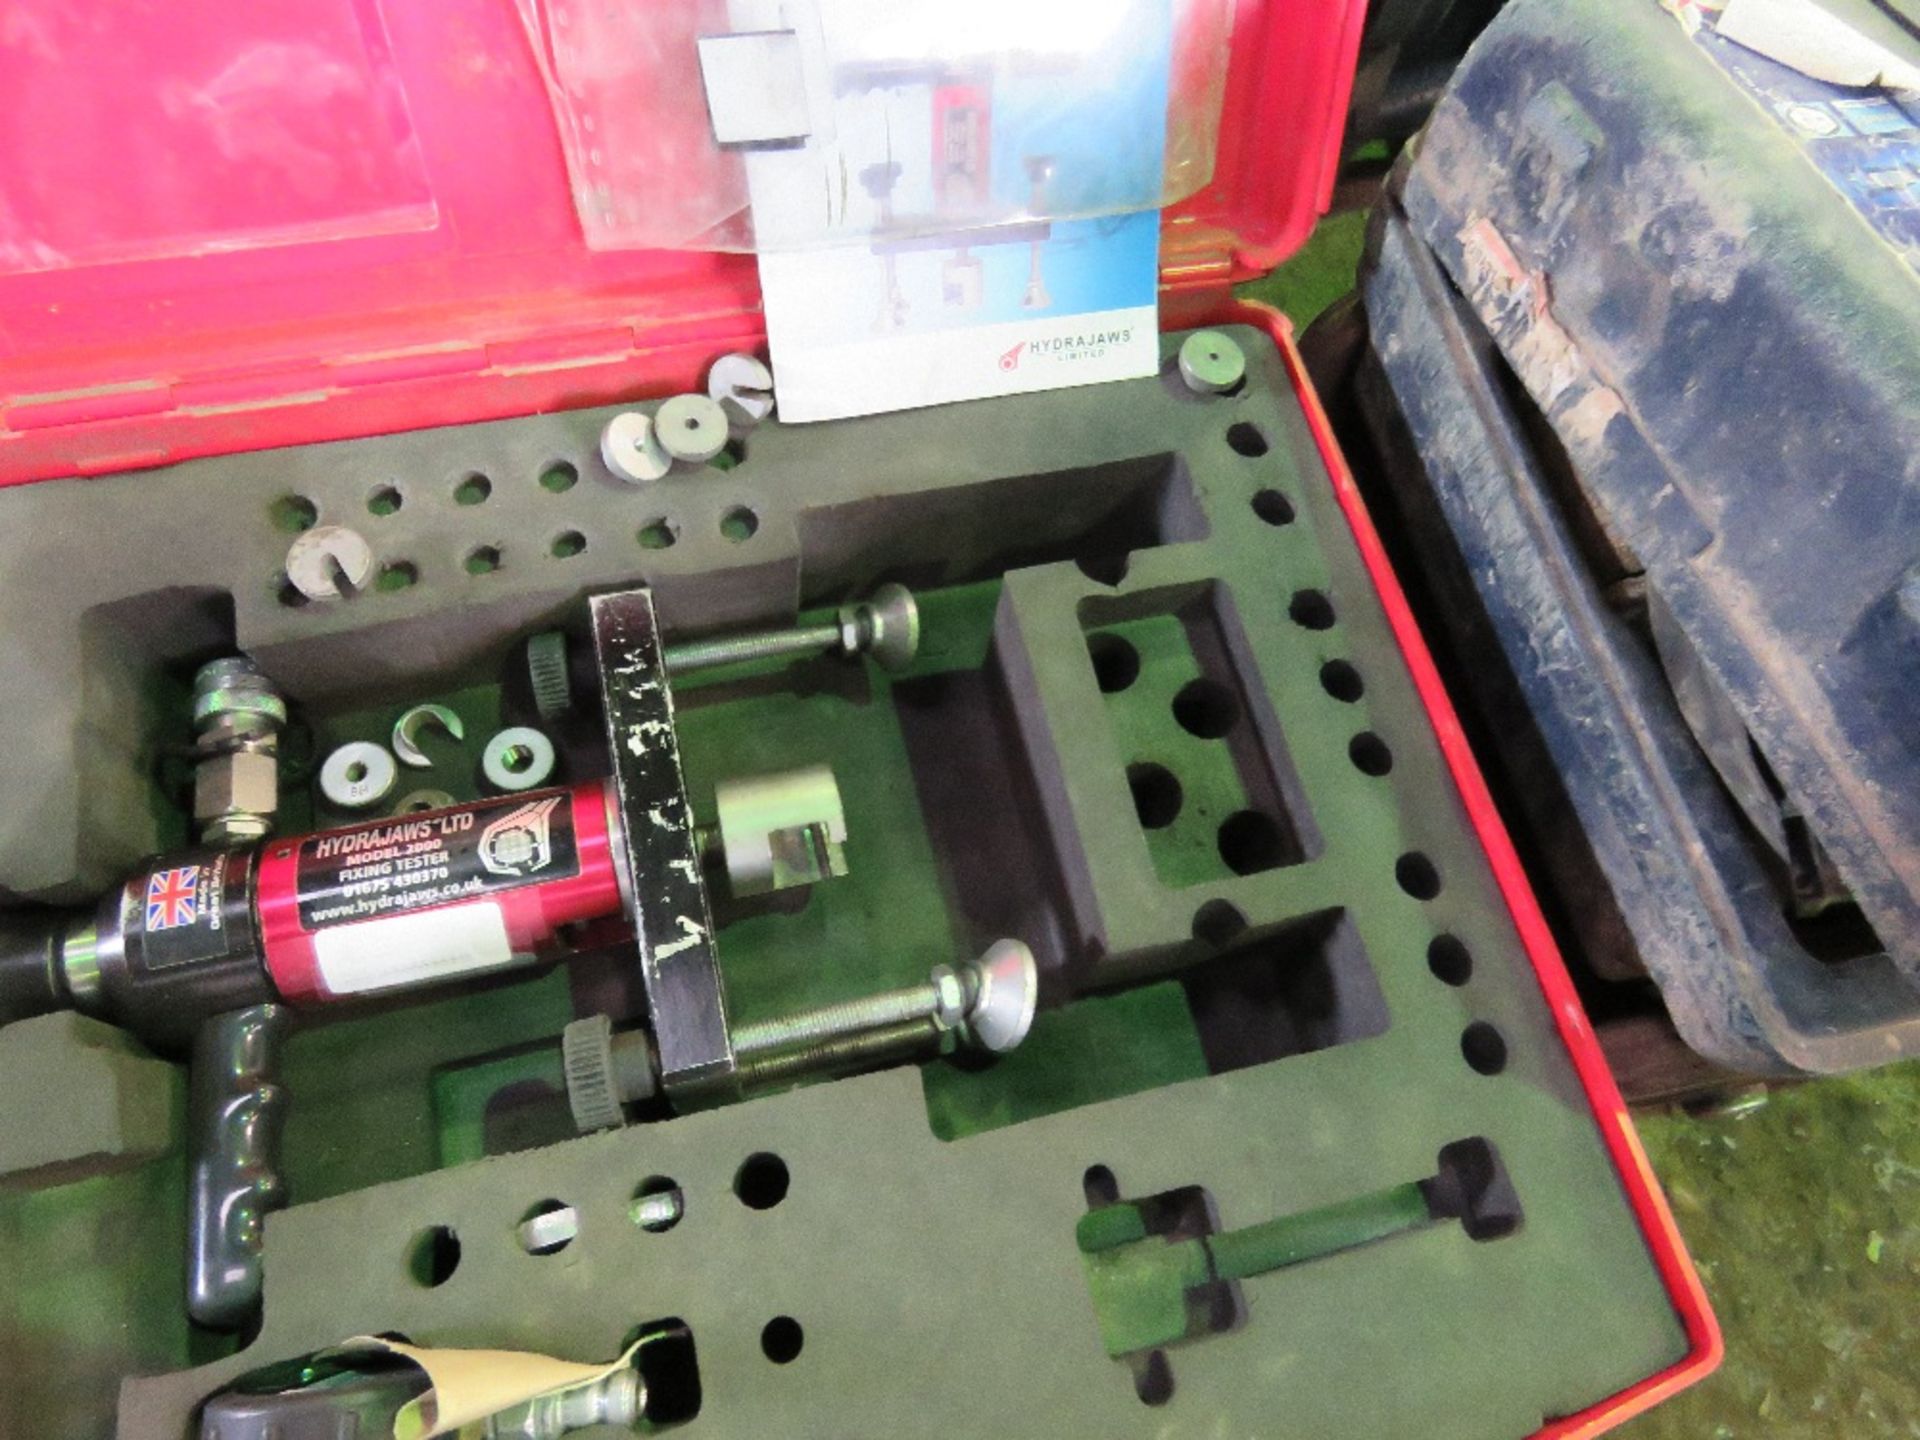 HYRDRAJAWS ANCHORAGE POINT TESTER IN CASE. SOURCED FROM DEPOT CLEARANCE DUE TO A CHANGE IN COMPANY P - Image 2 of 2